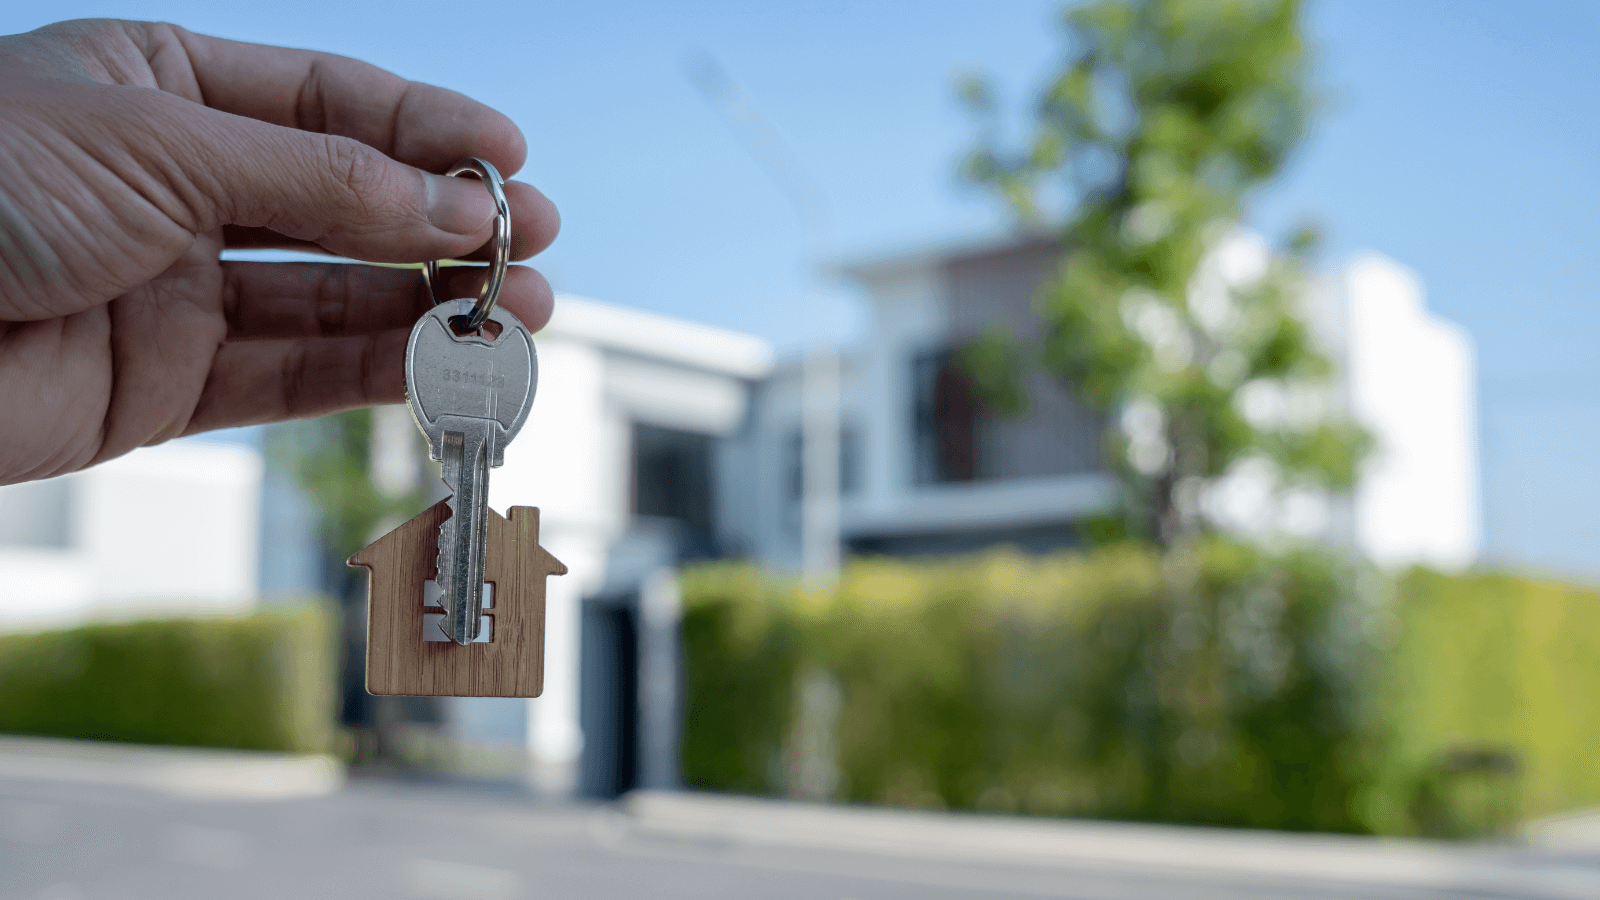 Hand Holding A Set Of House Keys In The Foreground, Blurred House In The Background